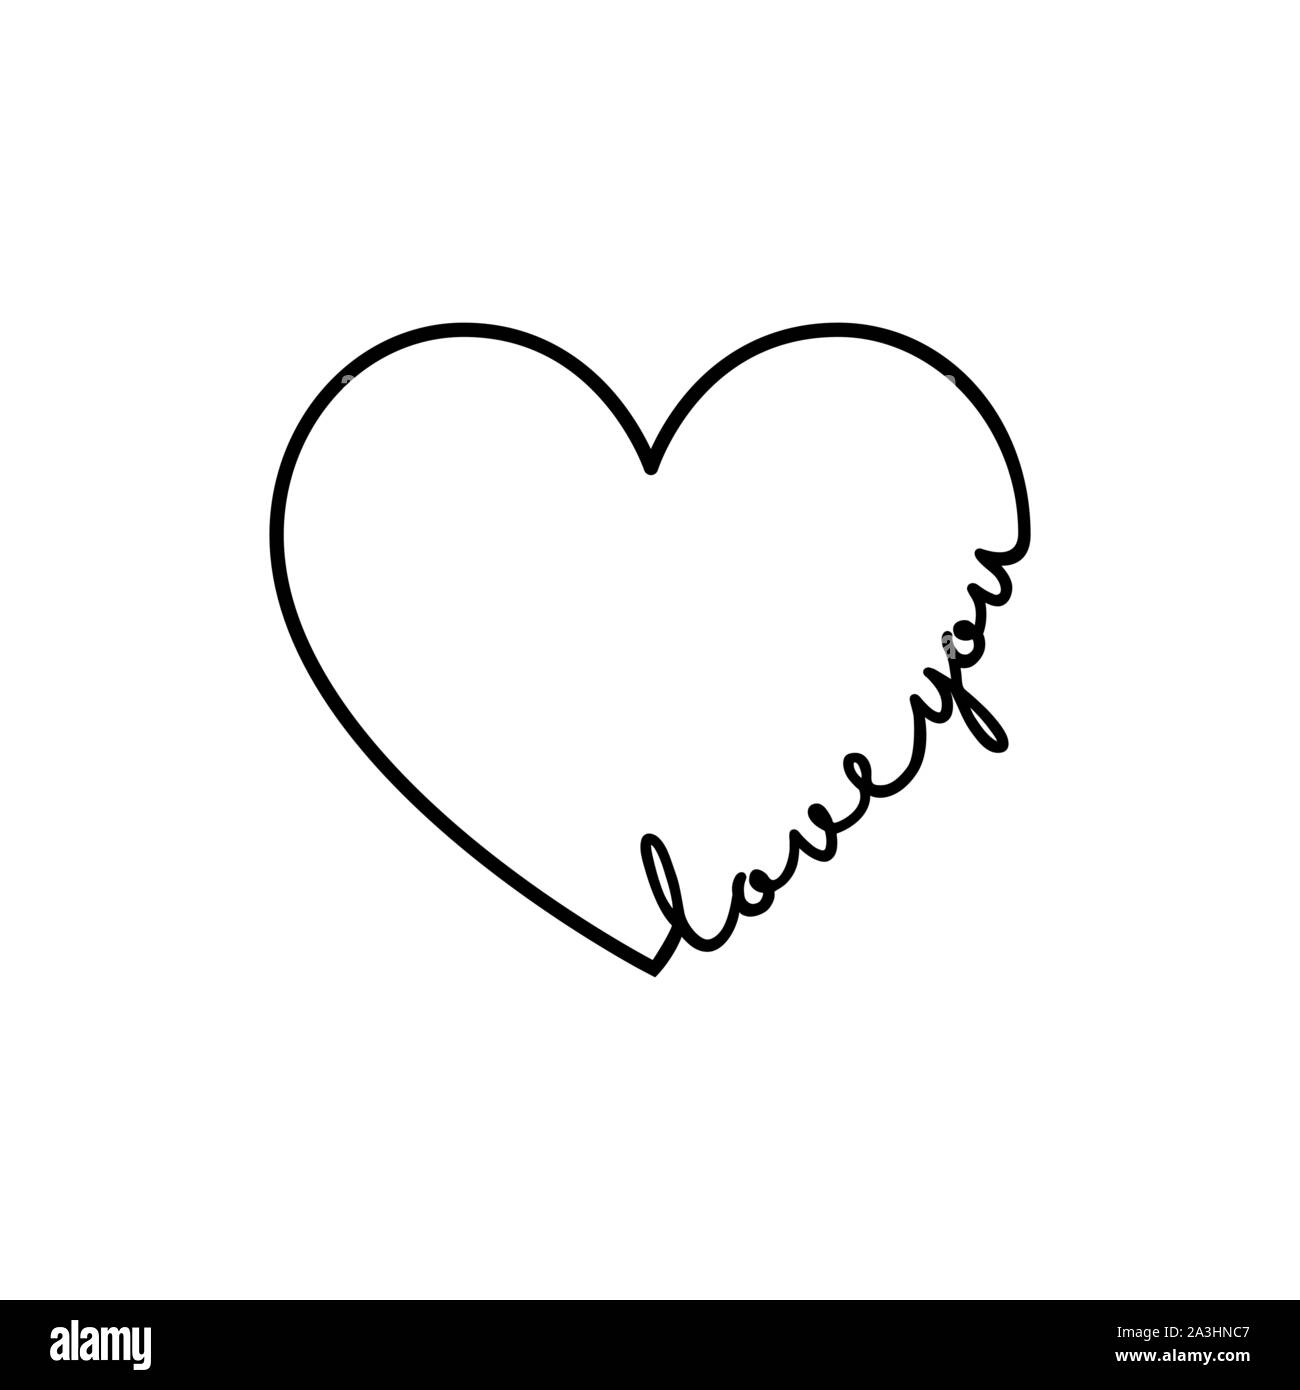 Hand Drawn Heart Black and White Stock Photos & Images - Page 2 - Alamy